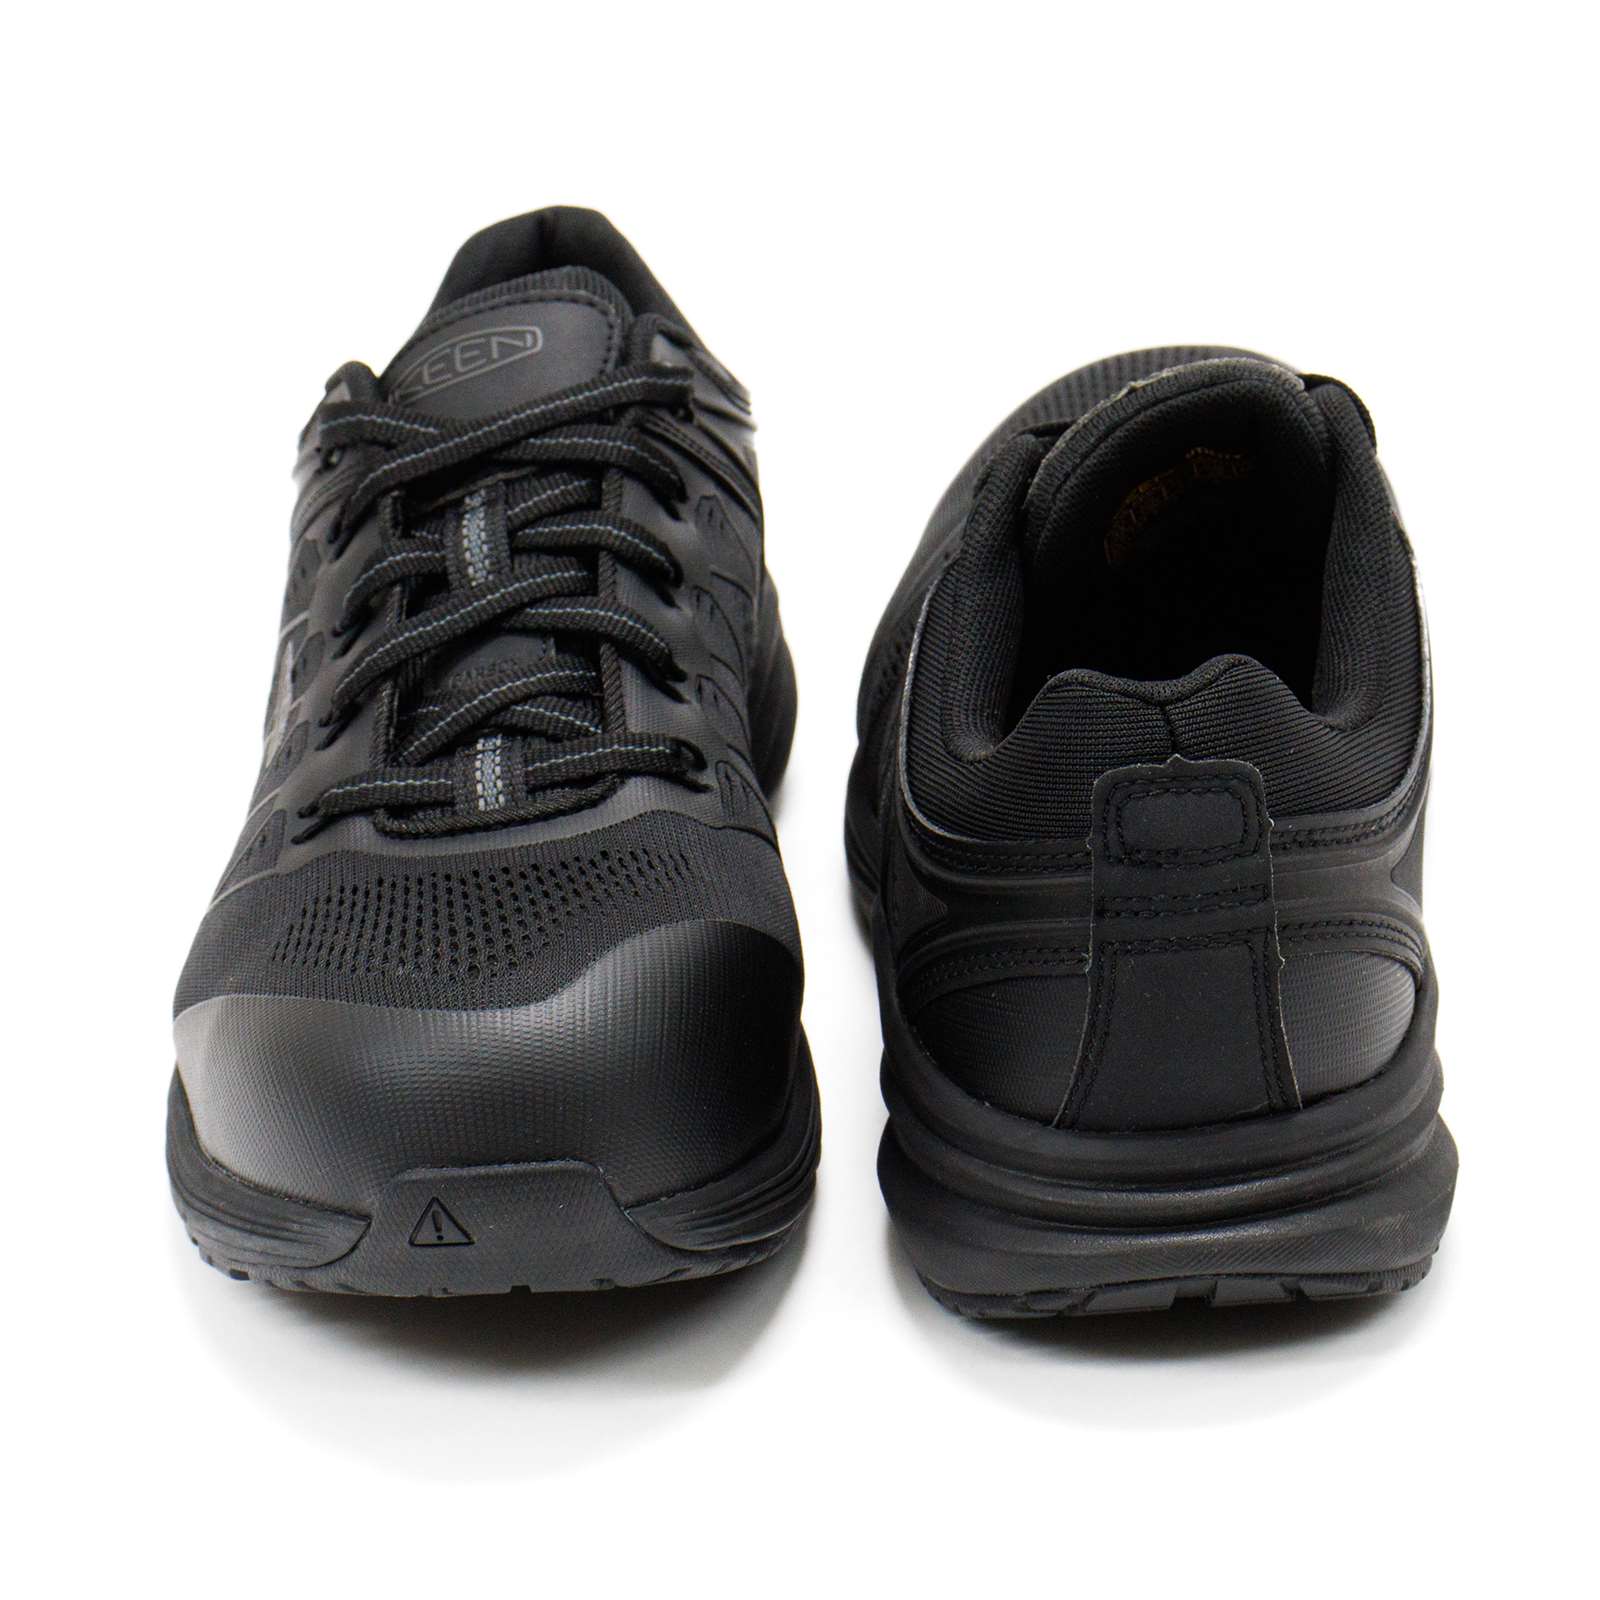 Keen Men Vista Energy Low Composite Toe Work And Safety Shoes